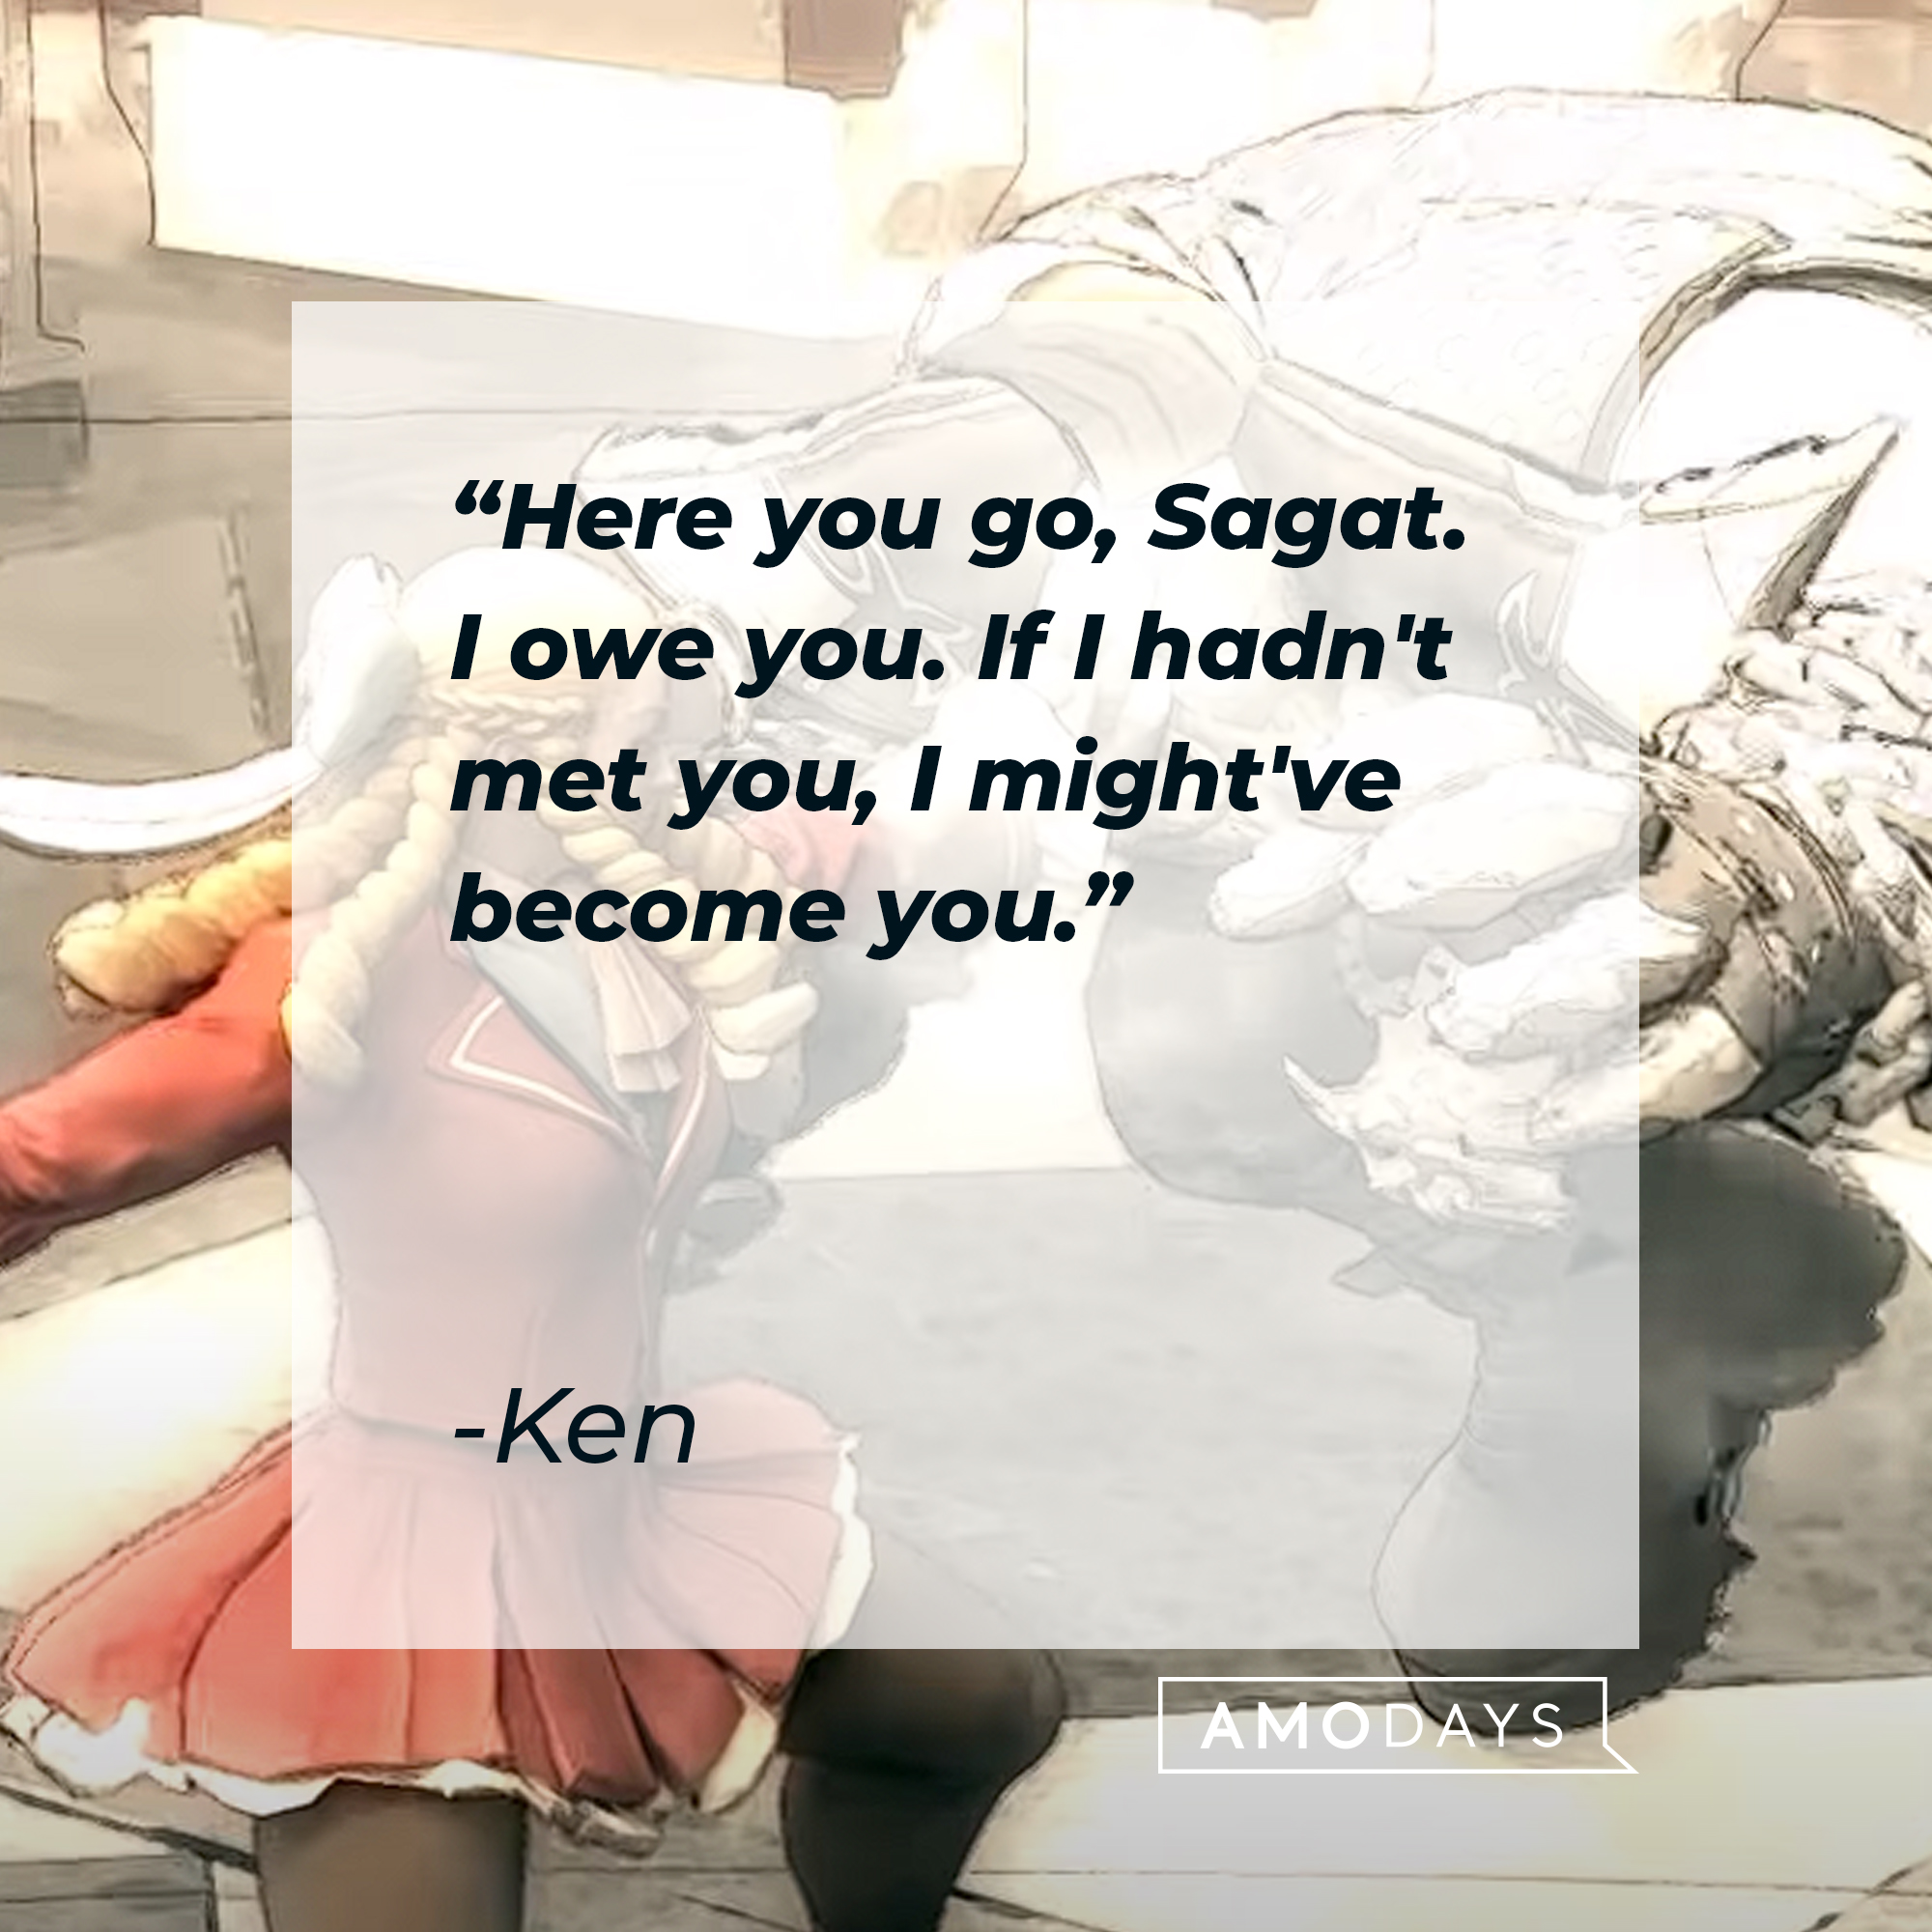 Ken's quote: "Here you go, Sagat. I owe you. If I hadn't met you, I might've become you." | Source: youtube.com/PlayStation